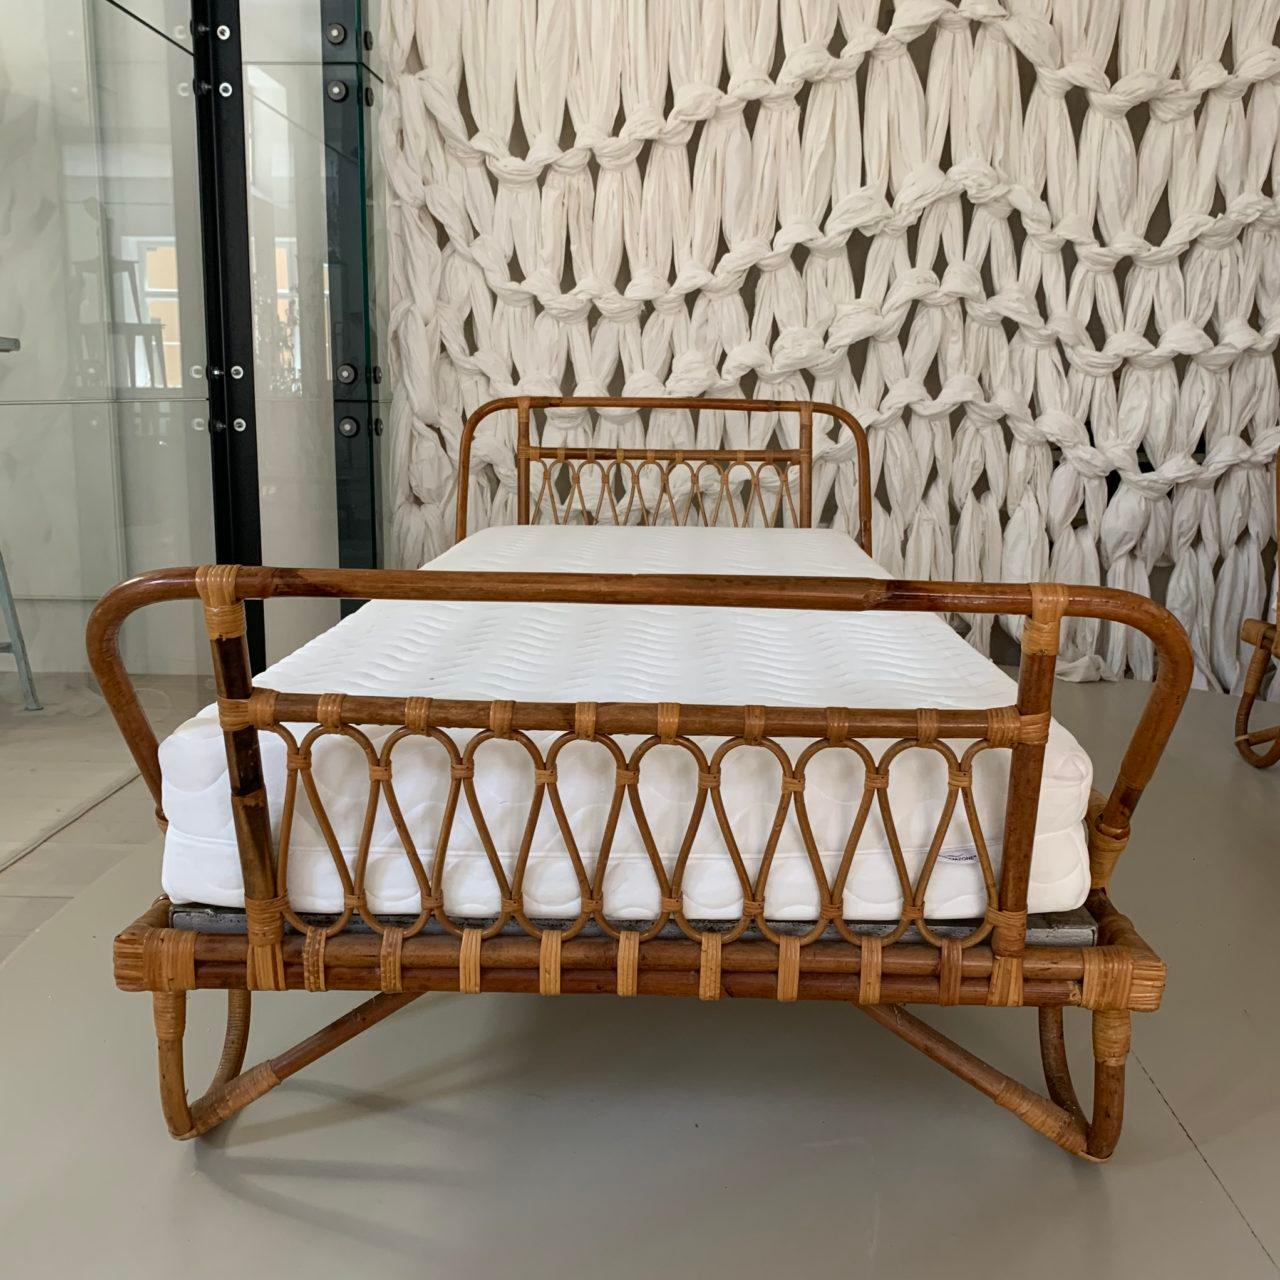 A rare and fabulous pair of 1940s / midcentury French daybeds or beds, originally from a convent in the South of France. Beautifully curvaceous formed rattanwork. In perfect condition, and with a wonderful play between the dark and pale rattan